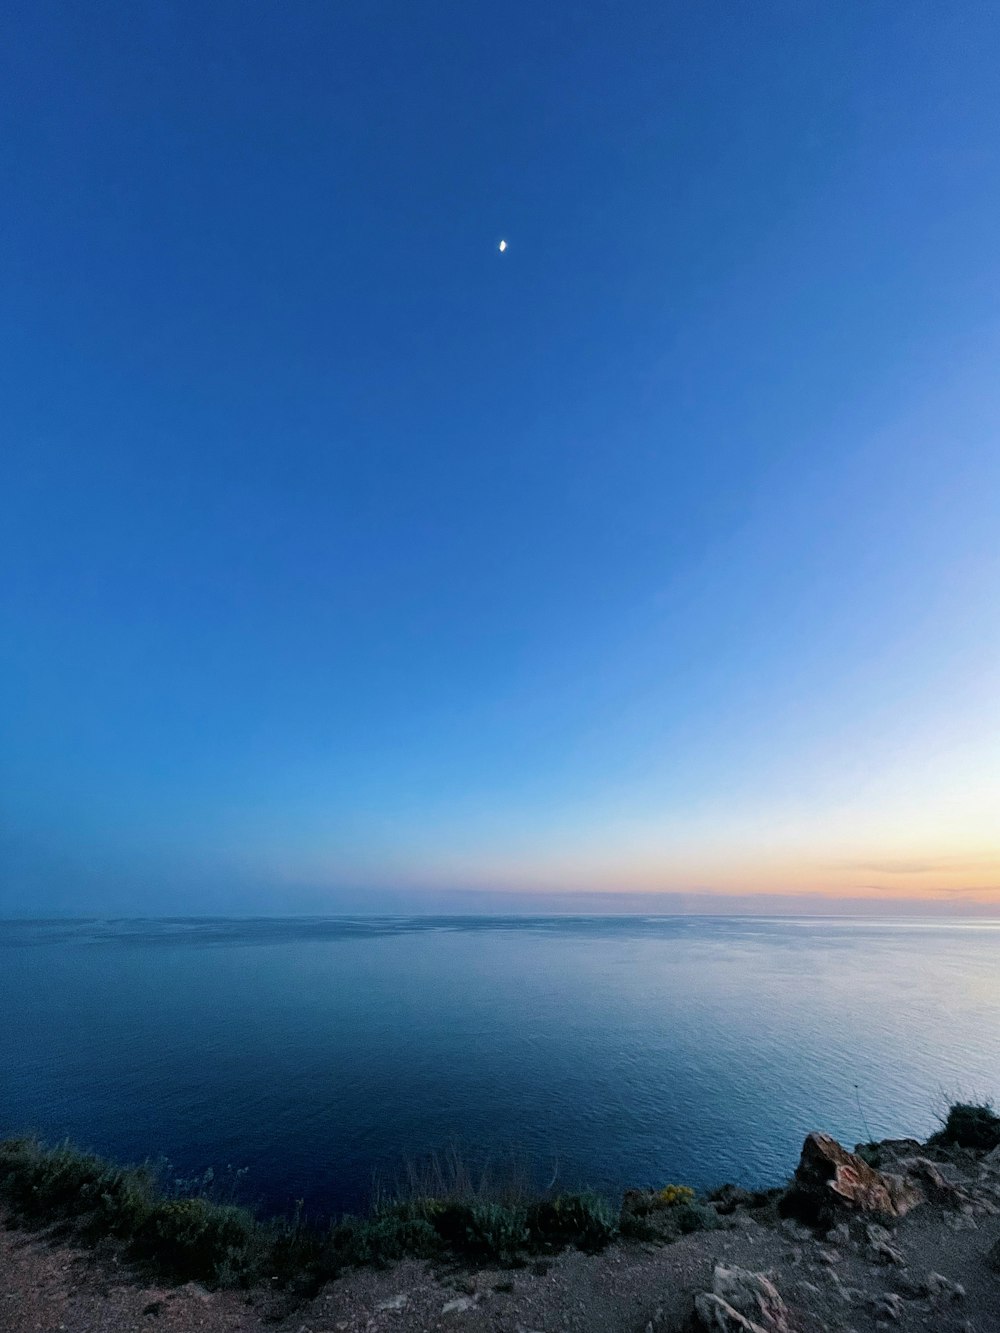 a body of water with a moon in the sky